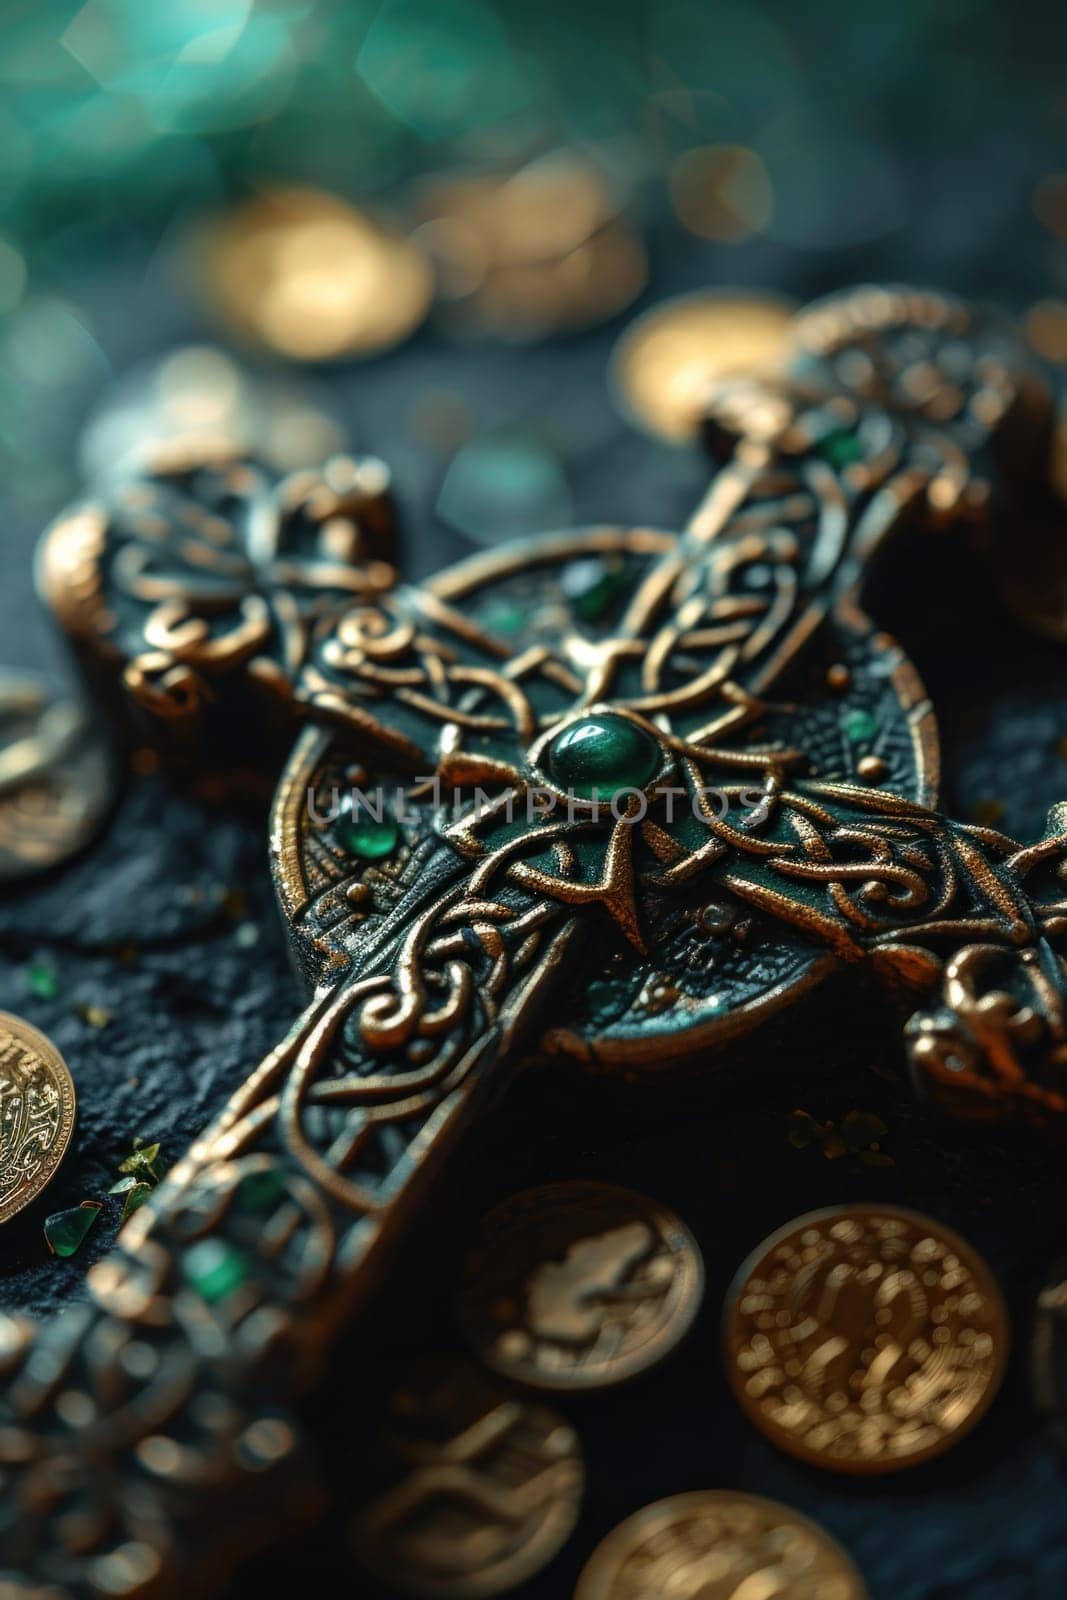 A close up of a cross and coins on top of each other